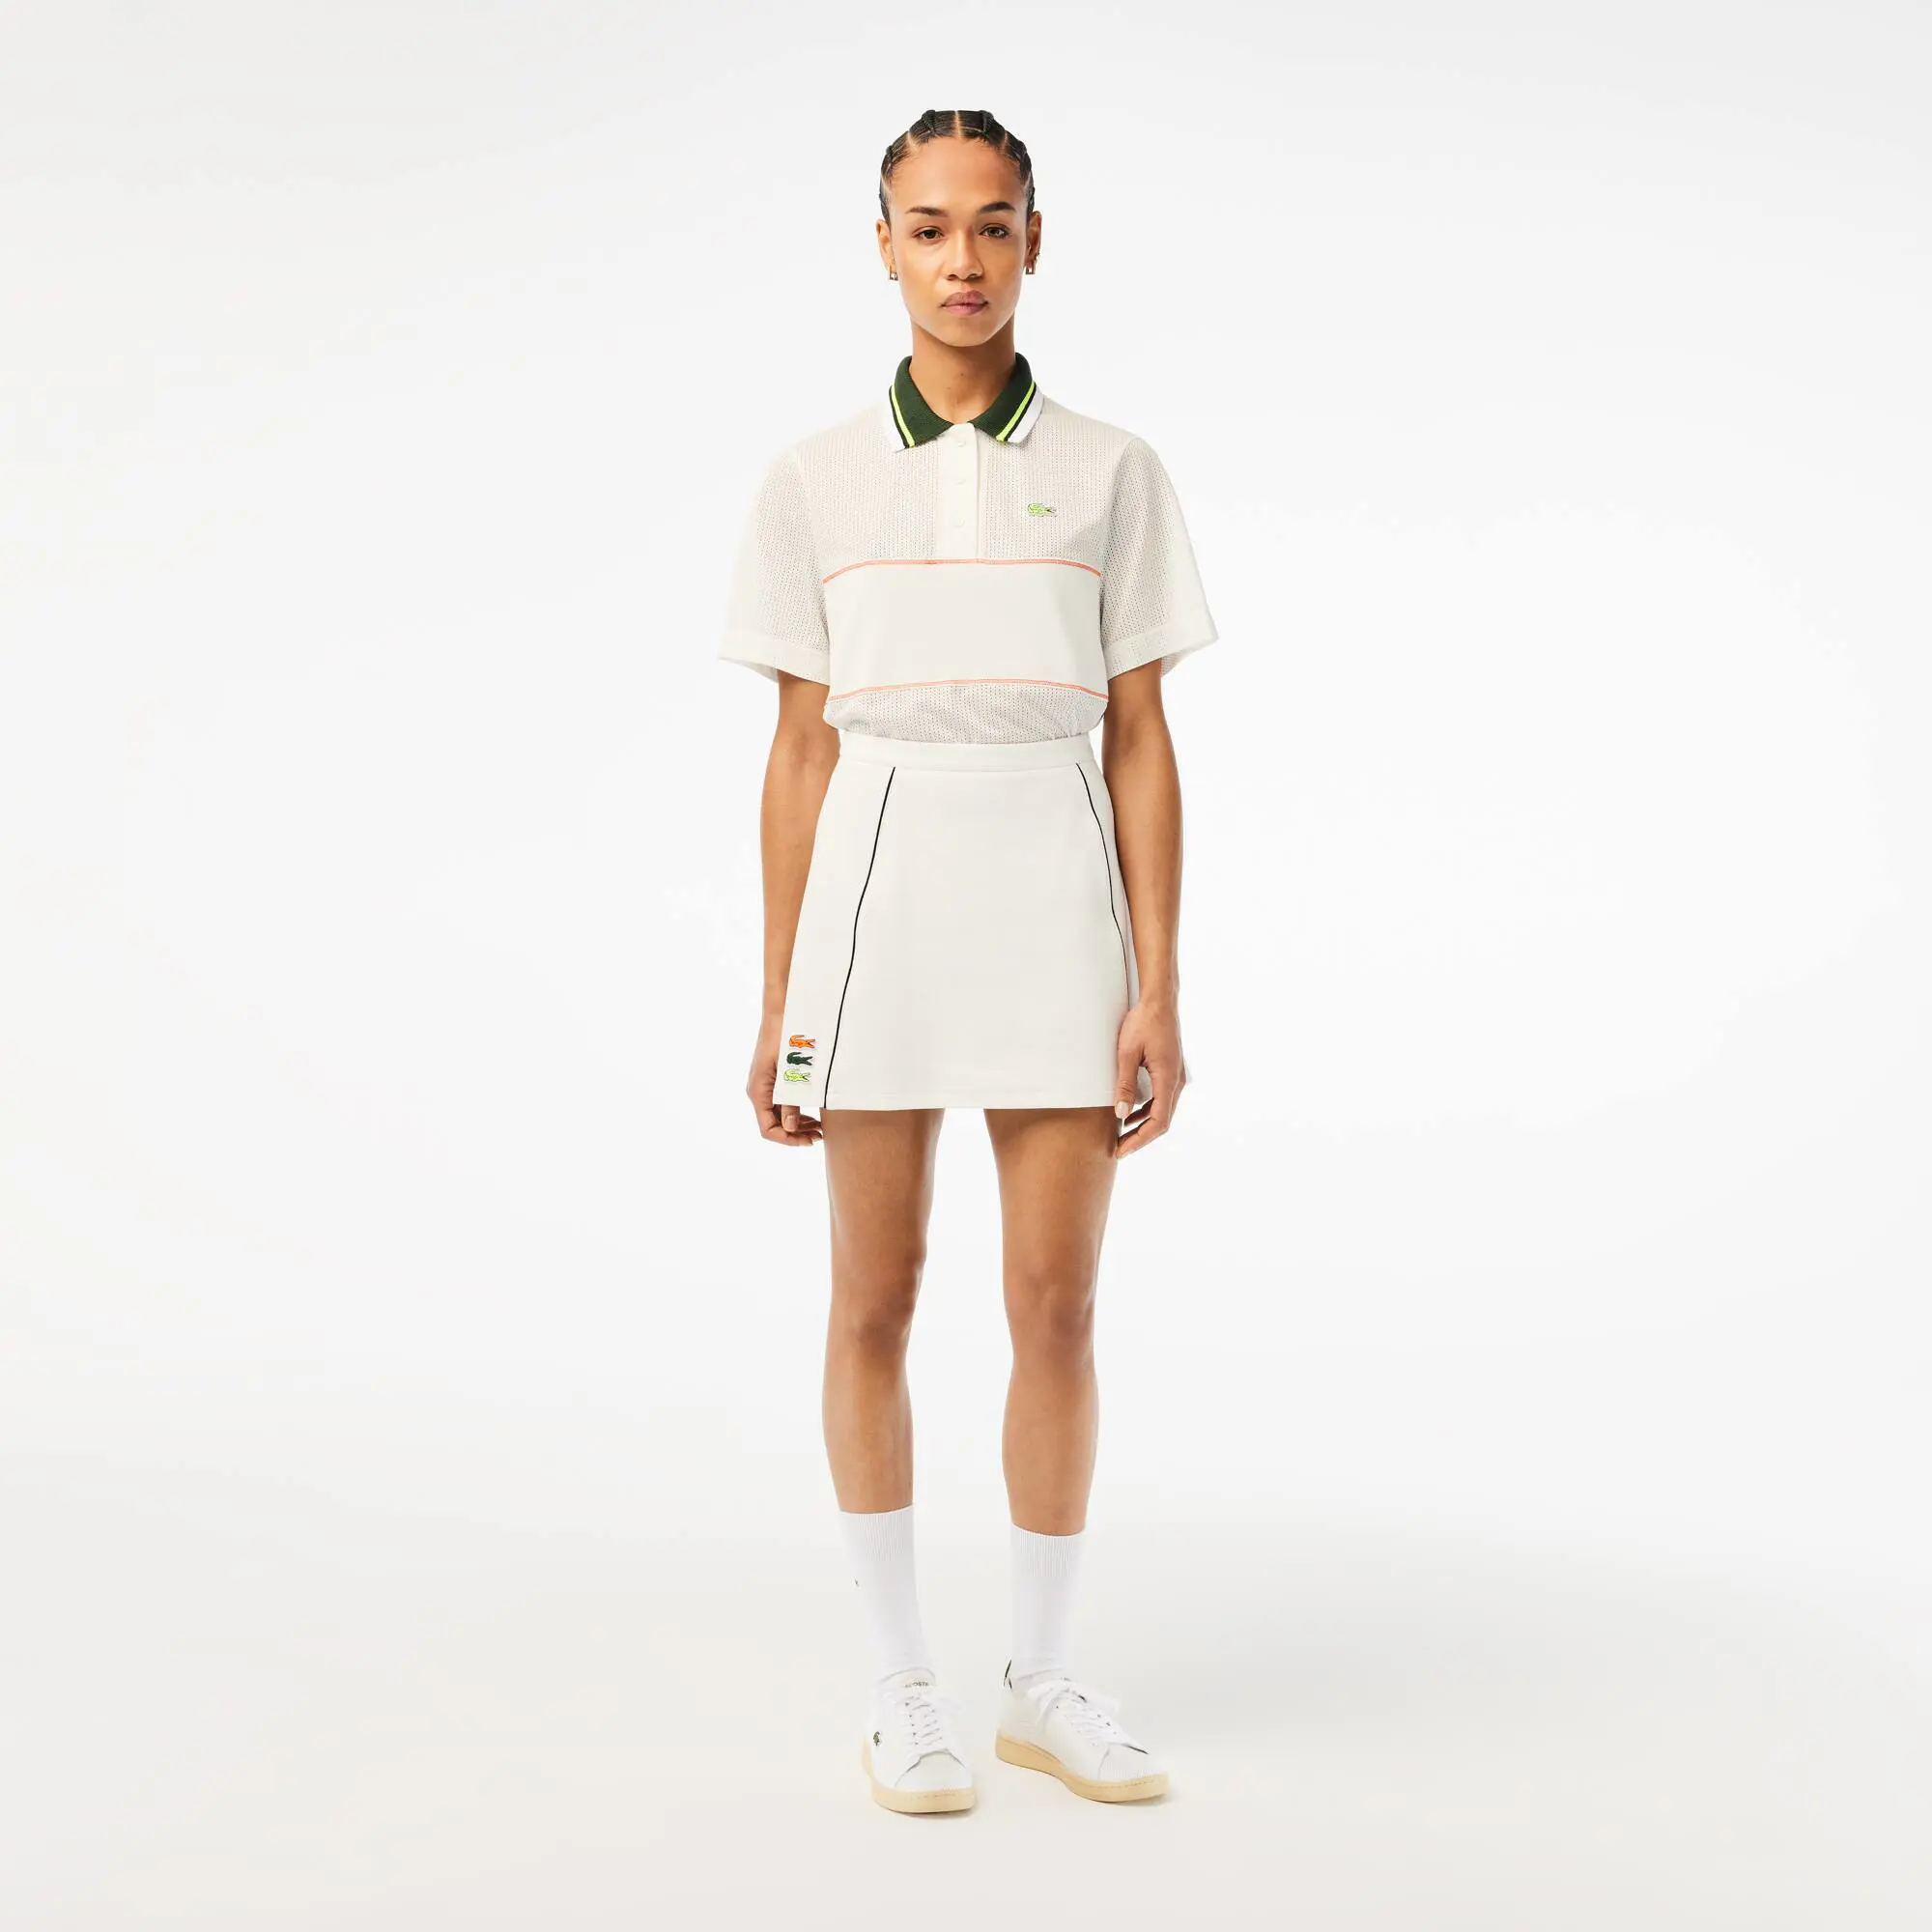 Lacoste Women’s Lacoste Organic Cotton French Made Skirt. 1